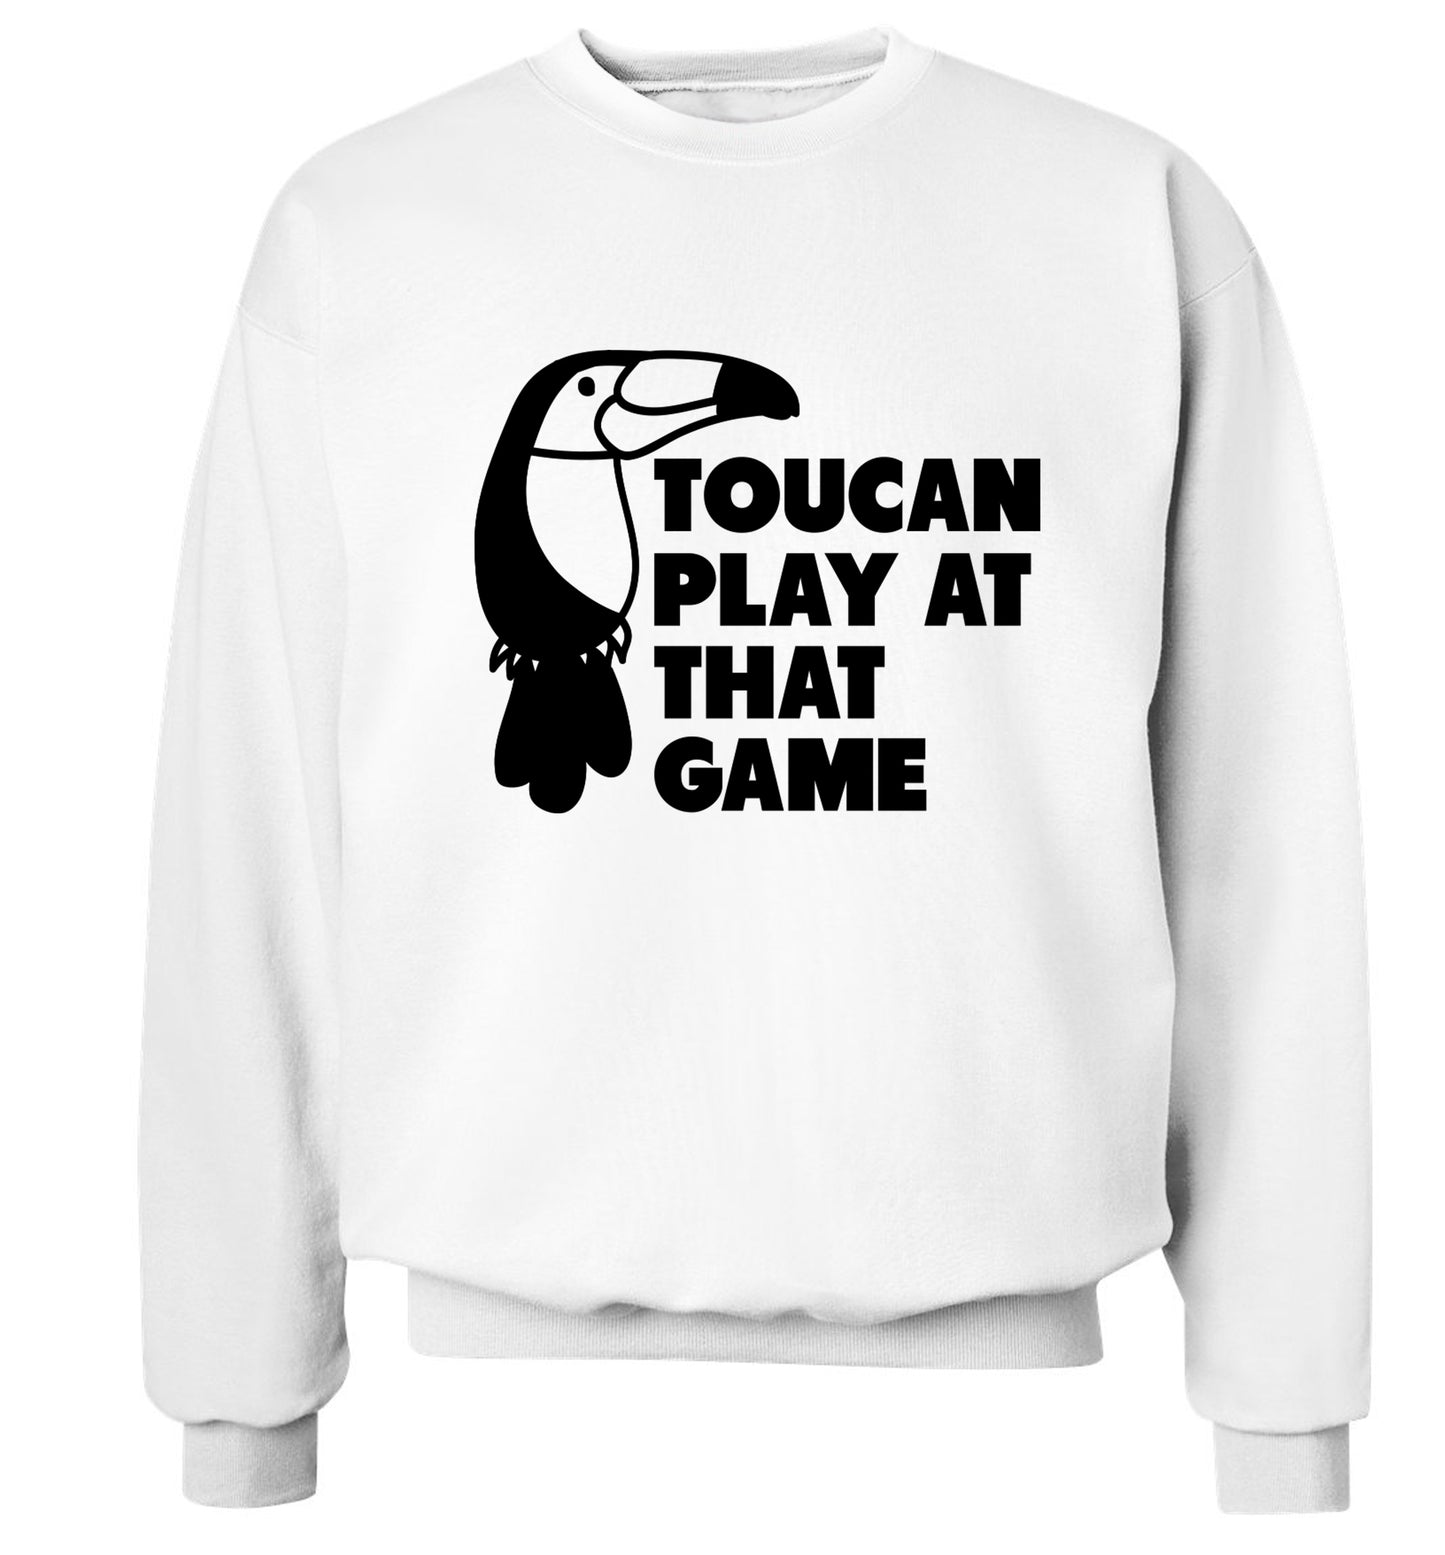 Toucan play at that game Adult's unisex white Sweater 2XL